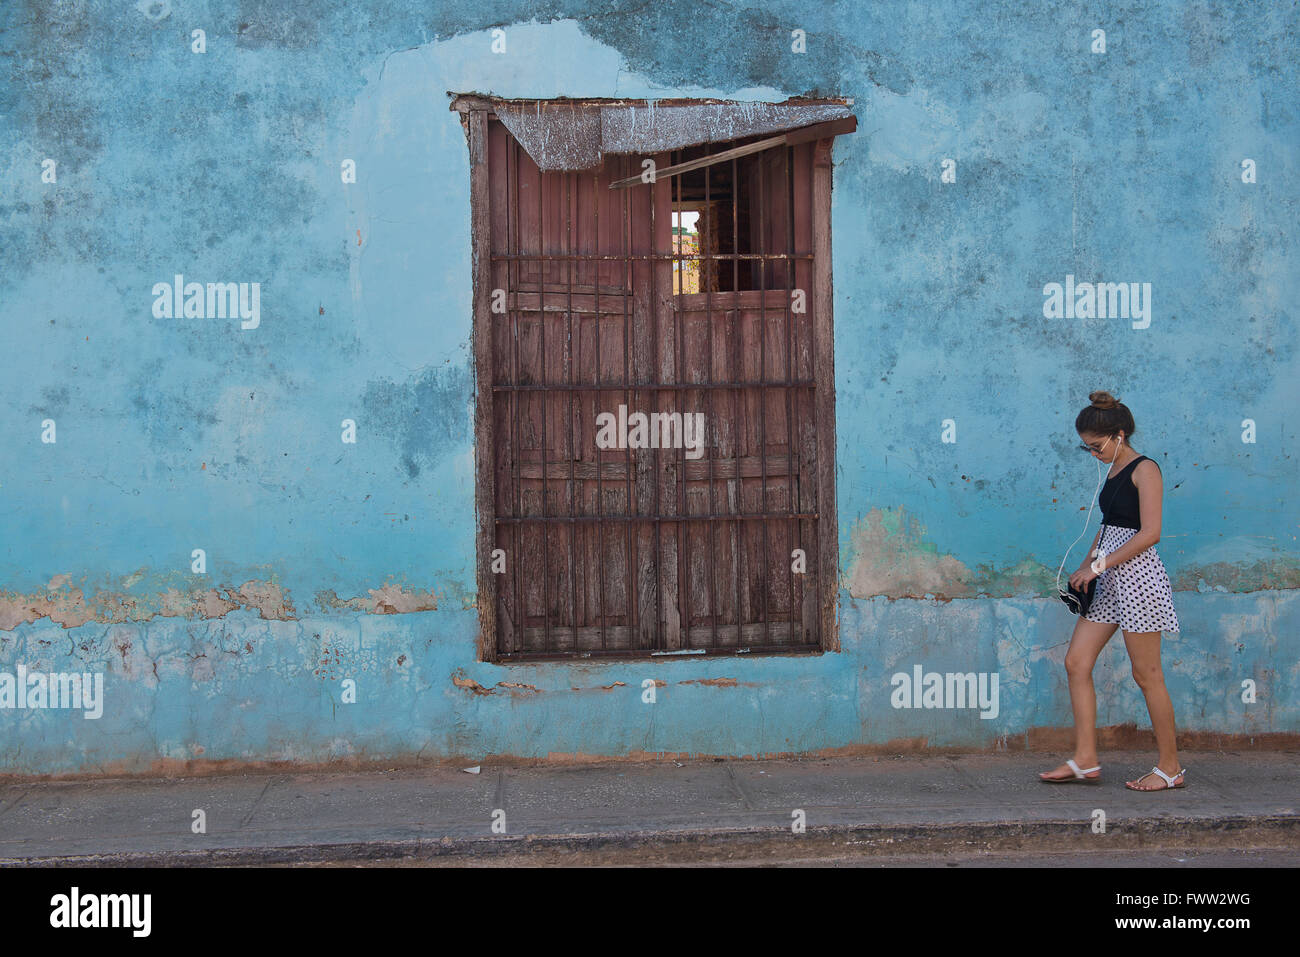 A woman walks past a wall of different colors and textures in the old Cuban town of Trinidad. Stock Photo